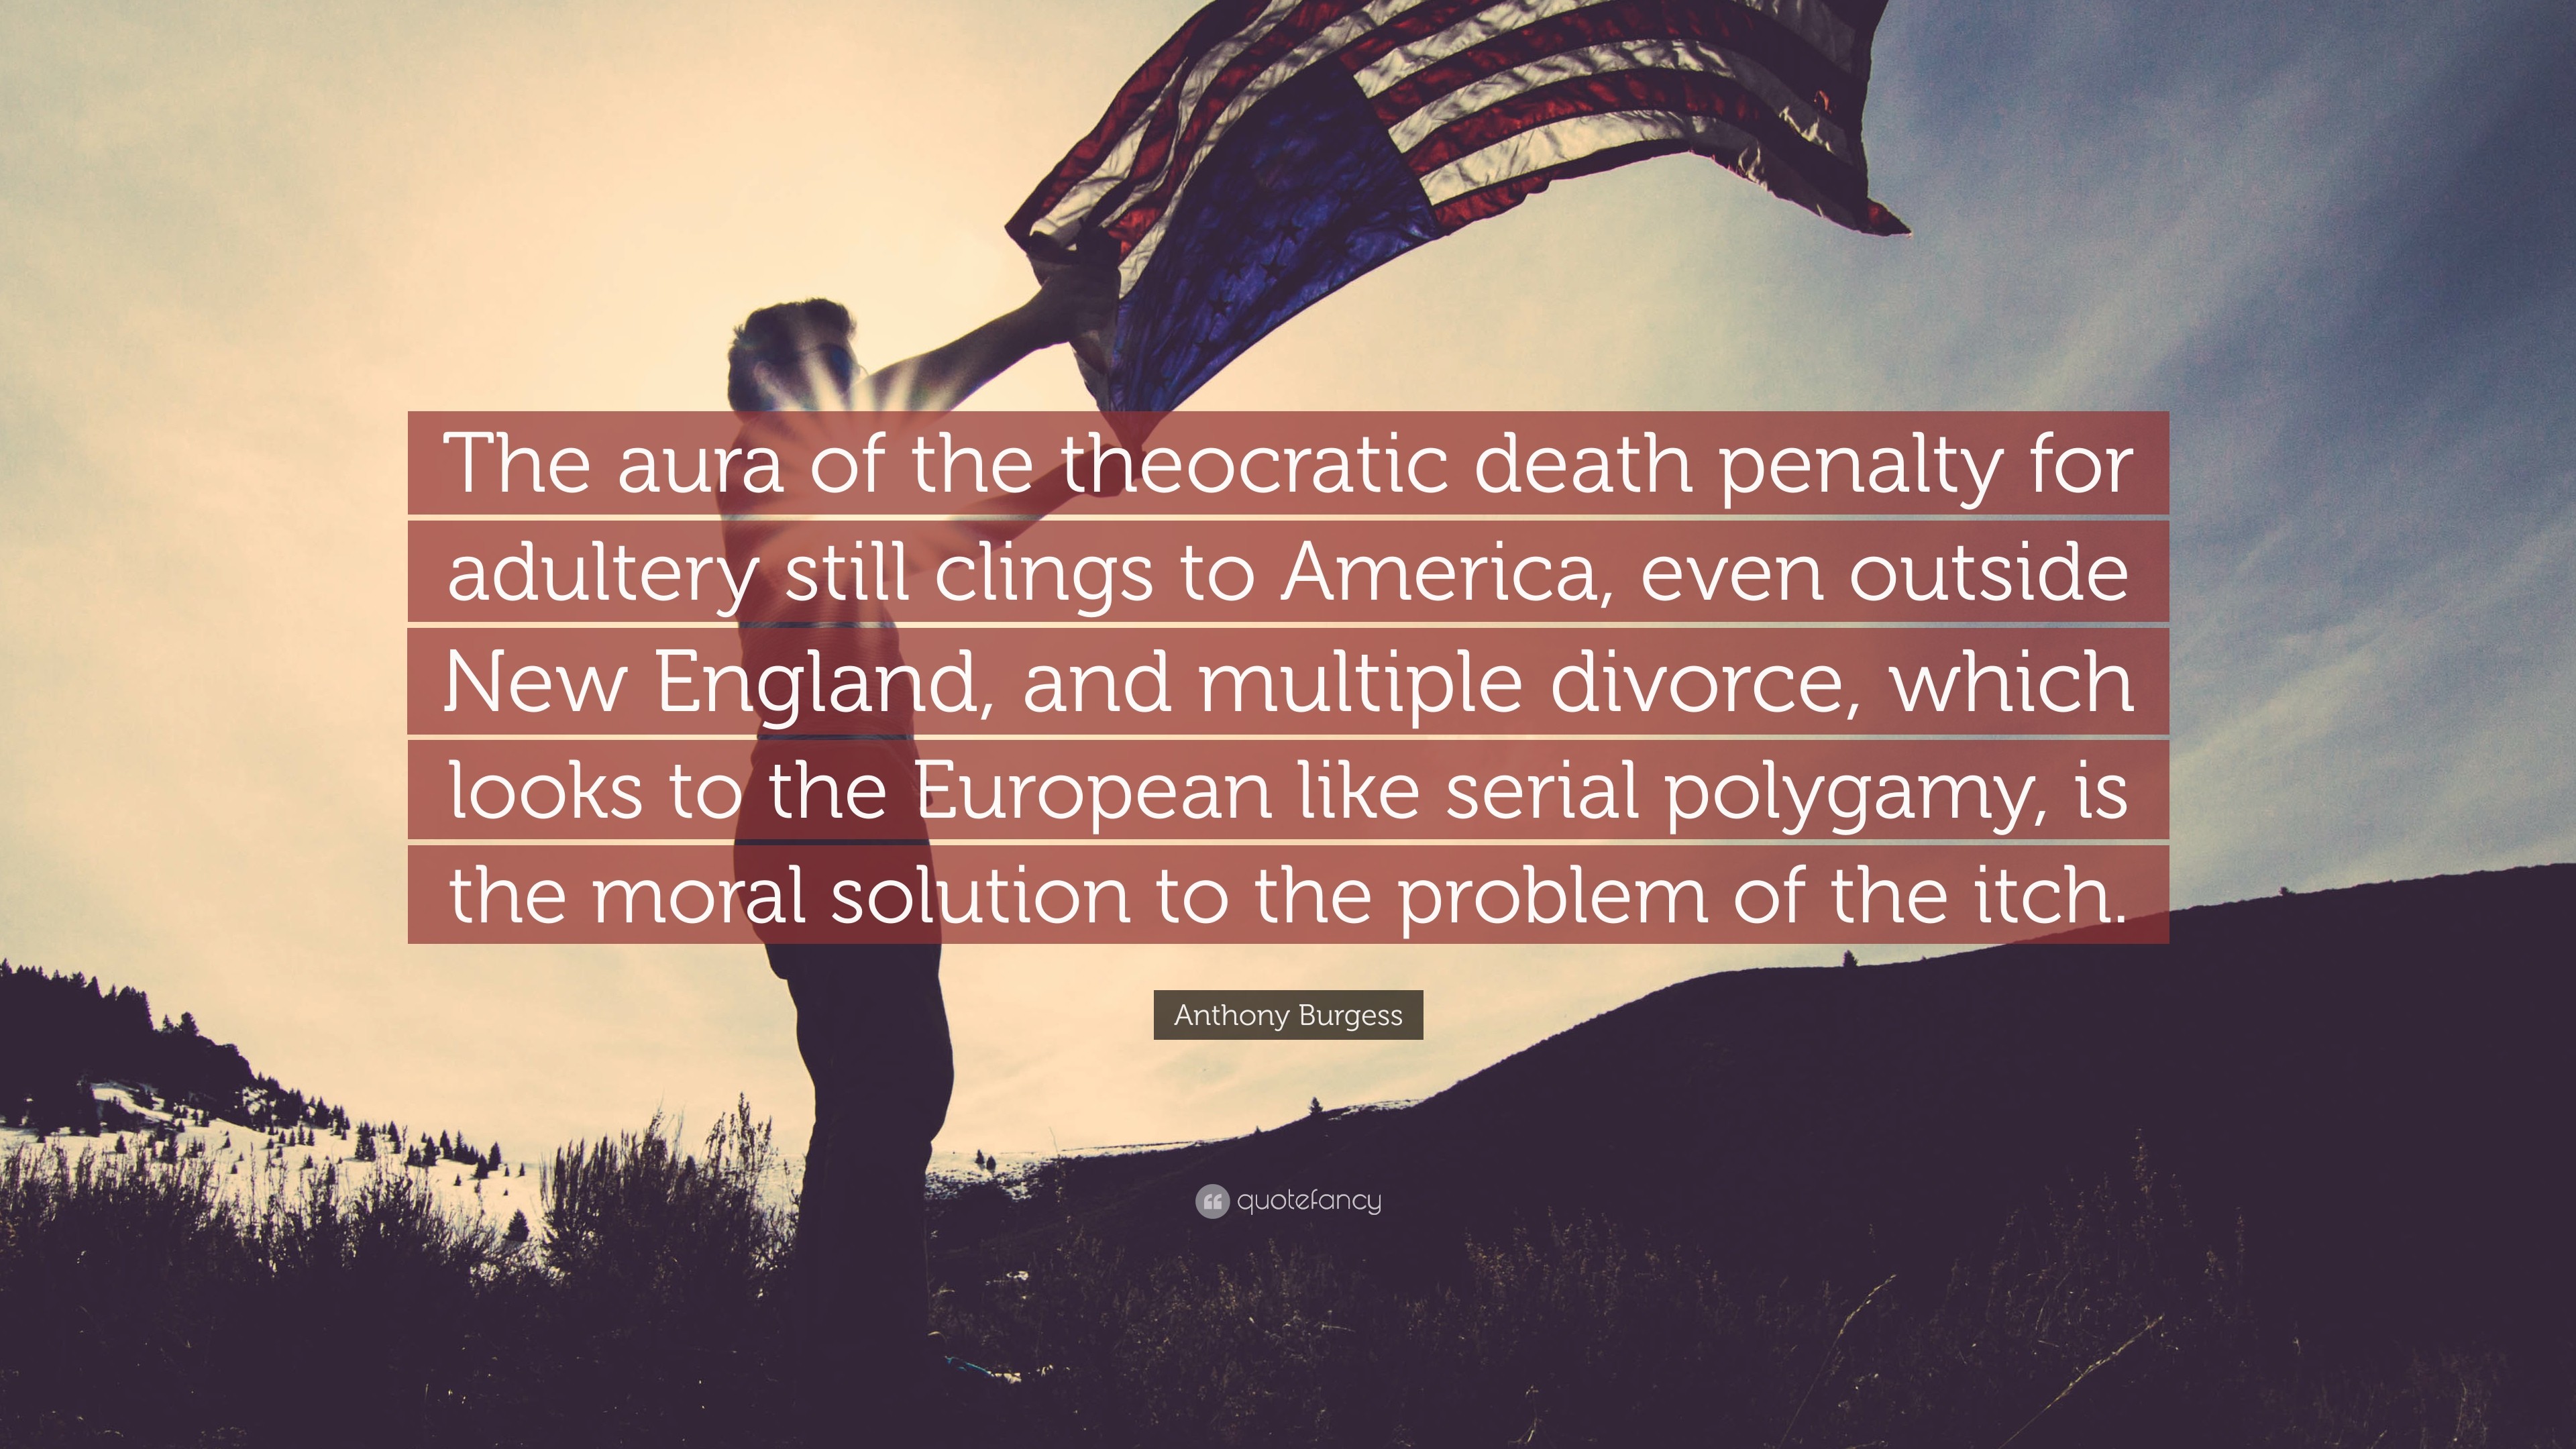 3840x2160 Anthony Burgess Quote: “The aura of the theocratic death penalty for  adultery still clings